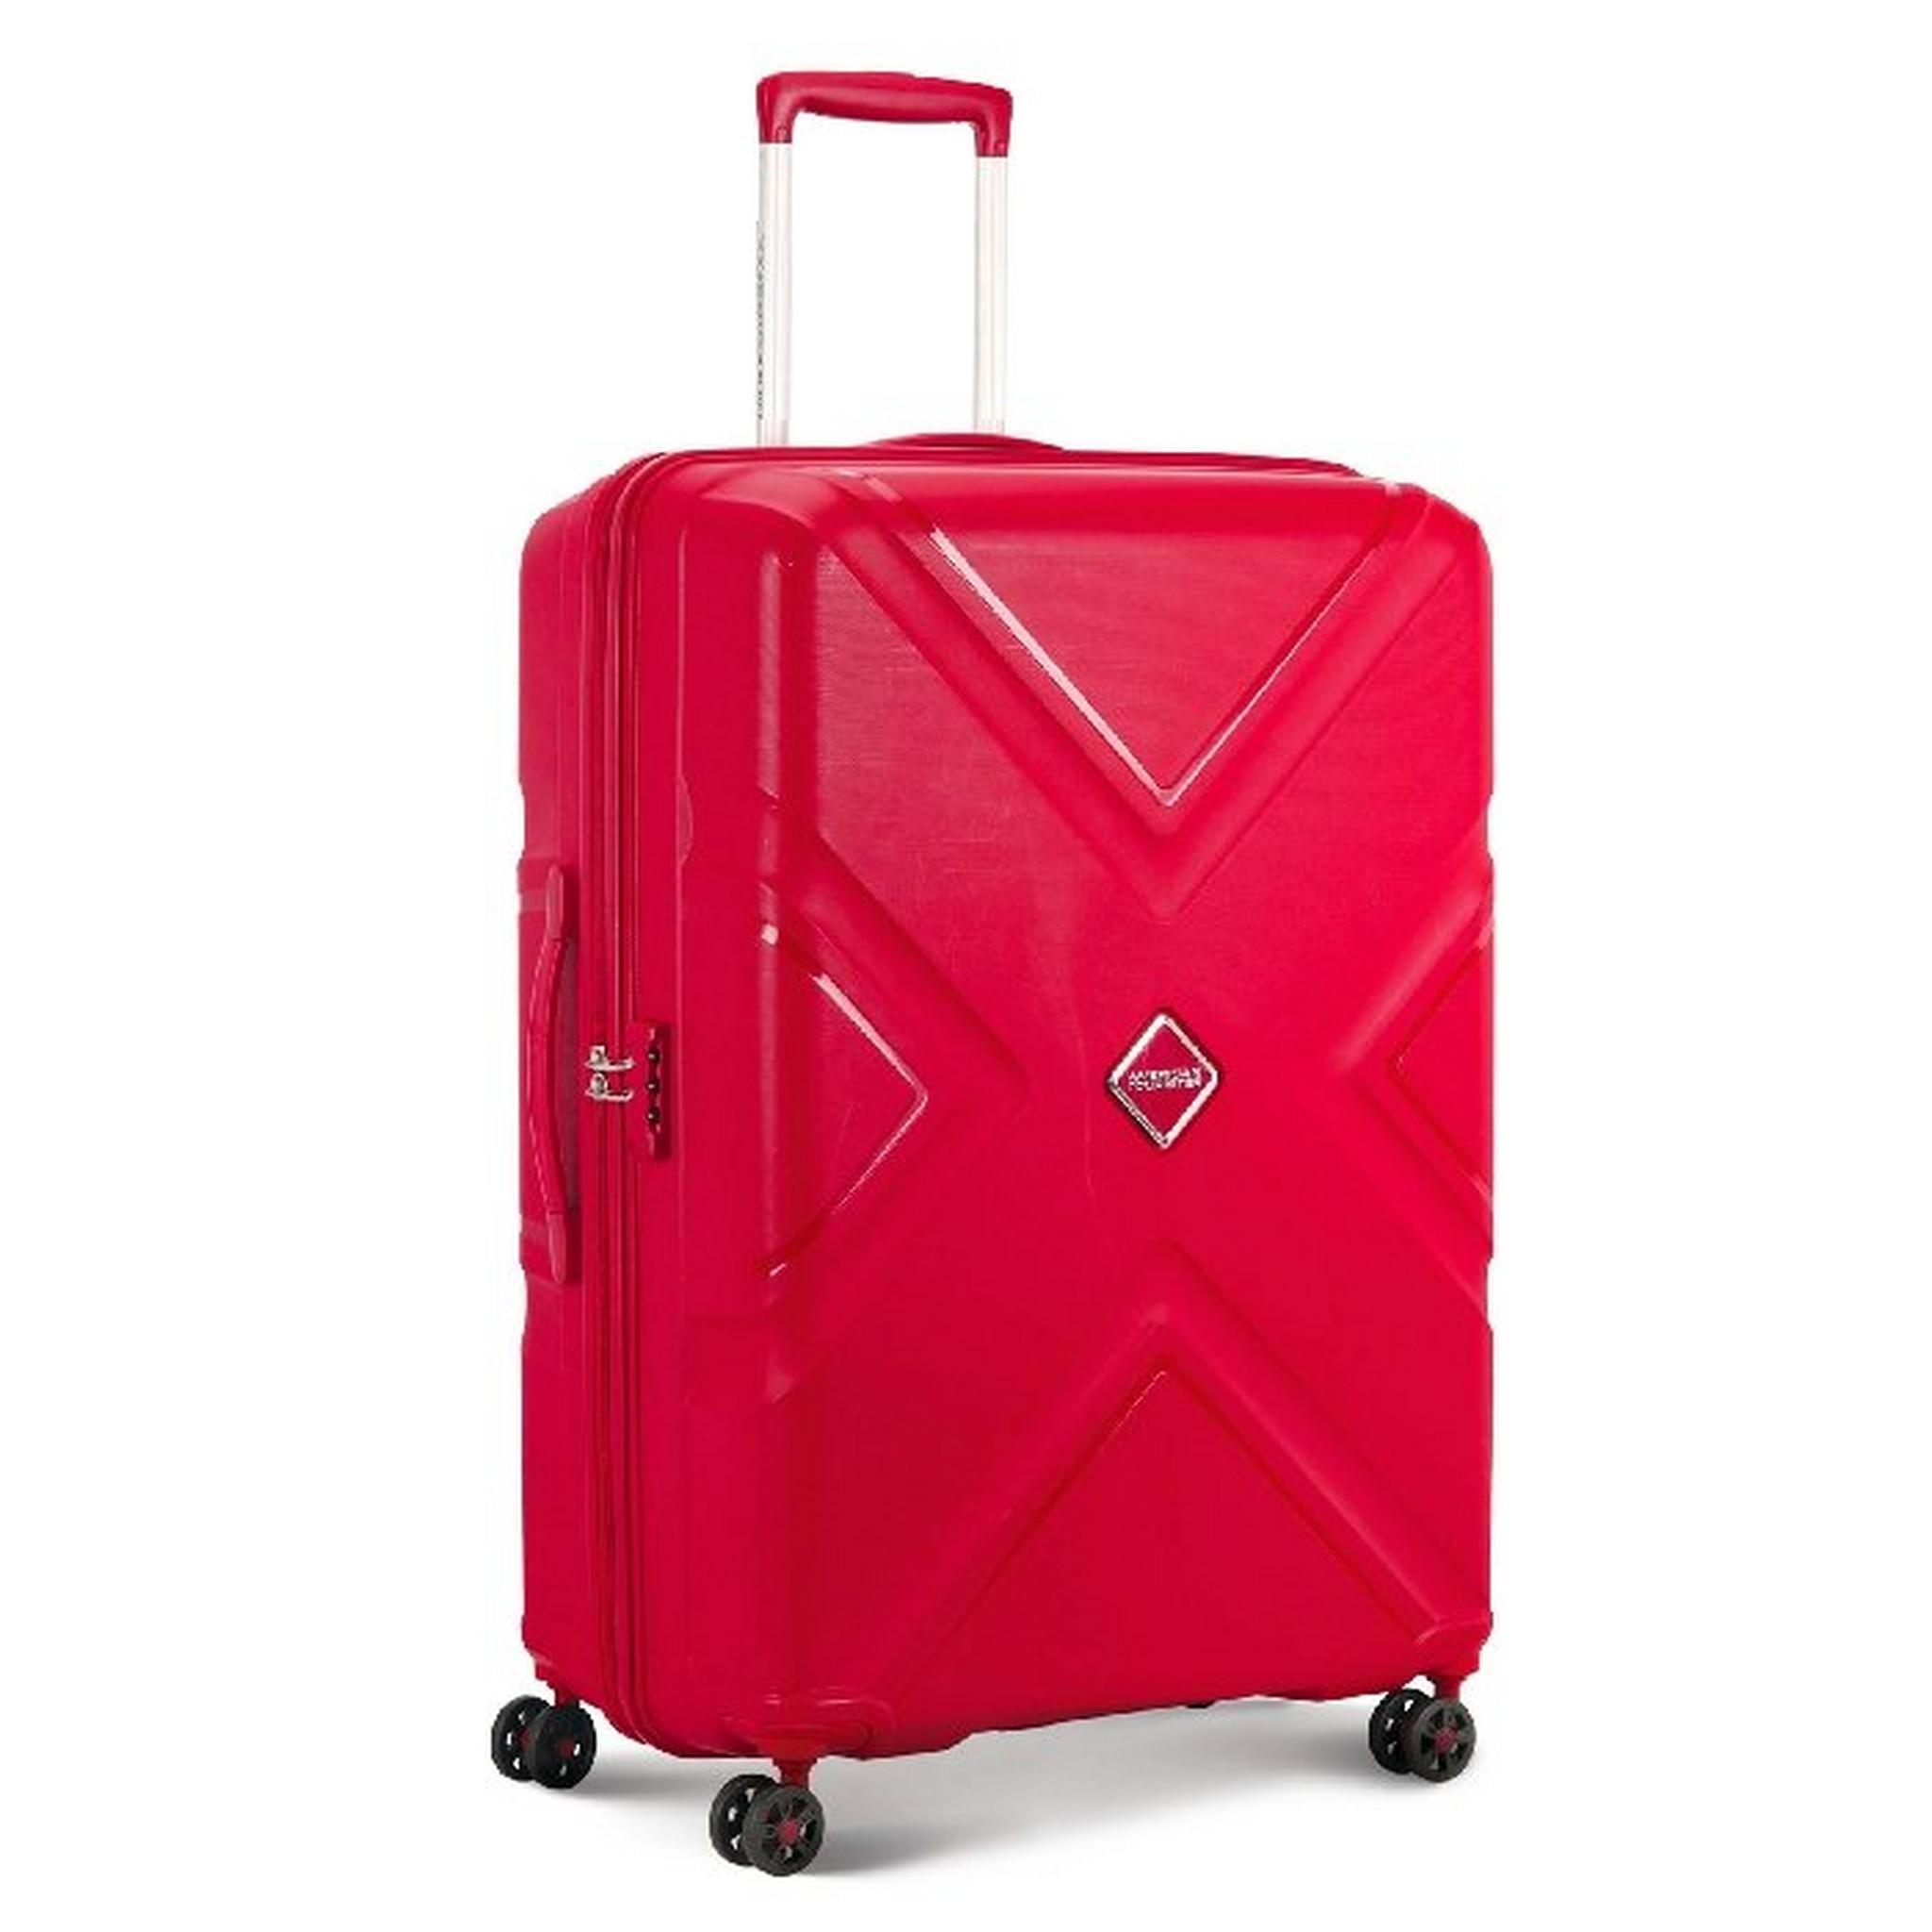 American Tourister Kross Hard Spinner 68cm Luggage - Red